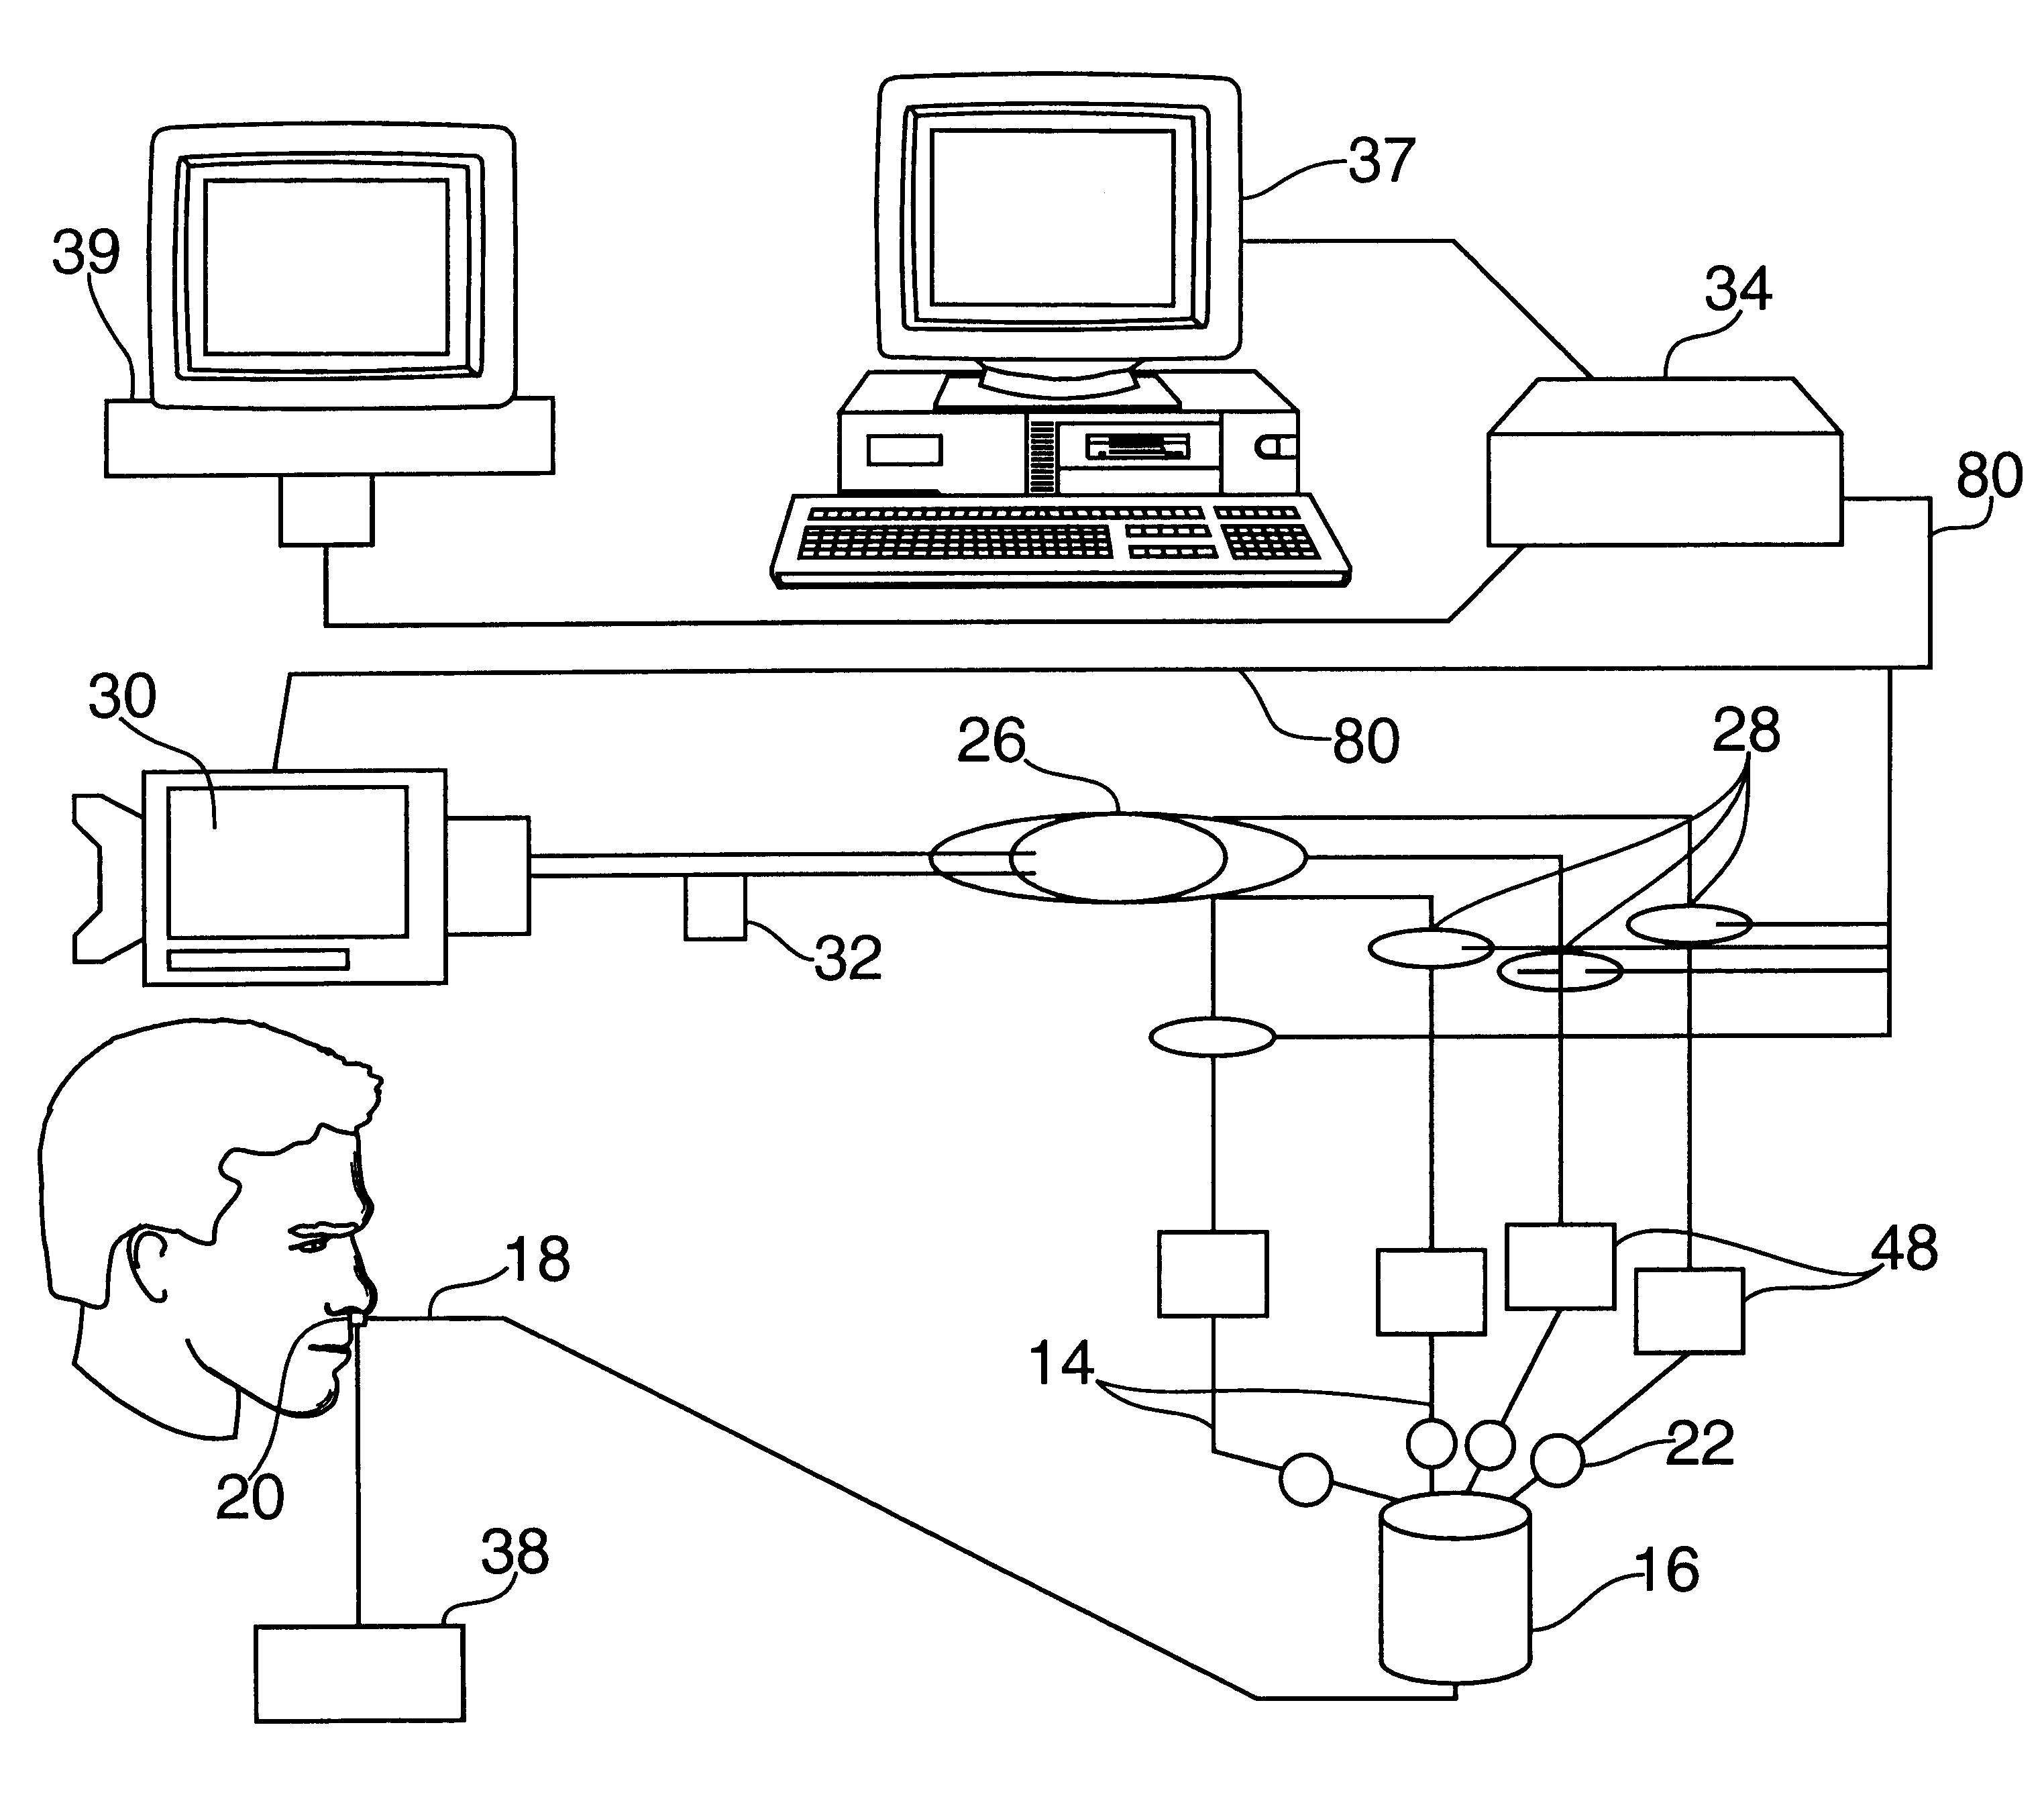 Multimedia linked scent delivery system